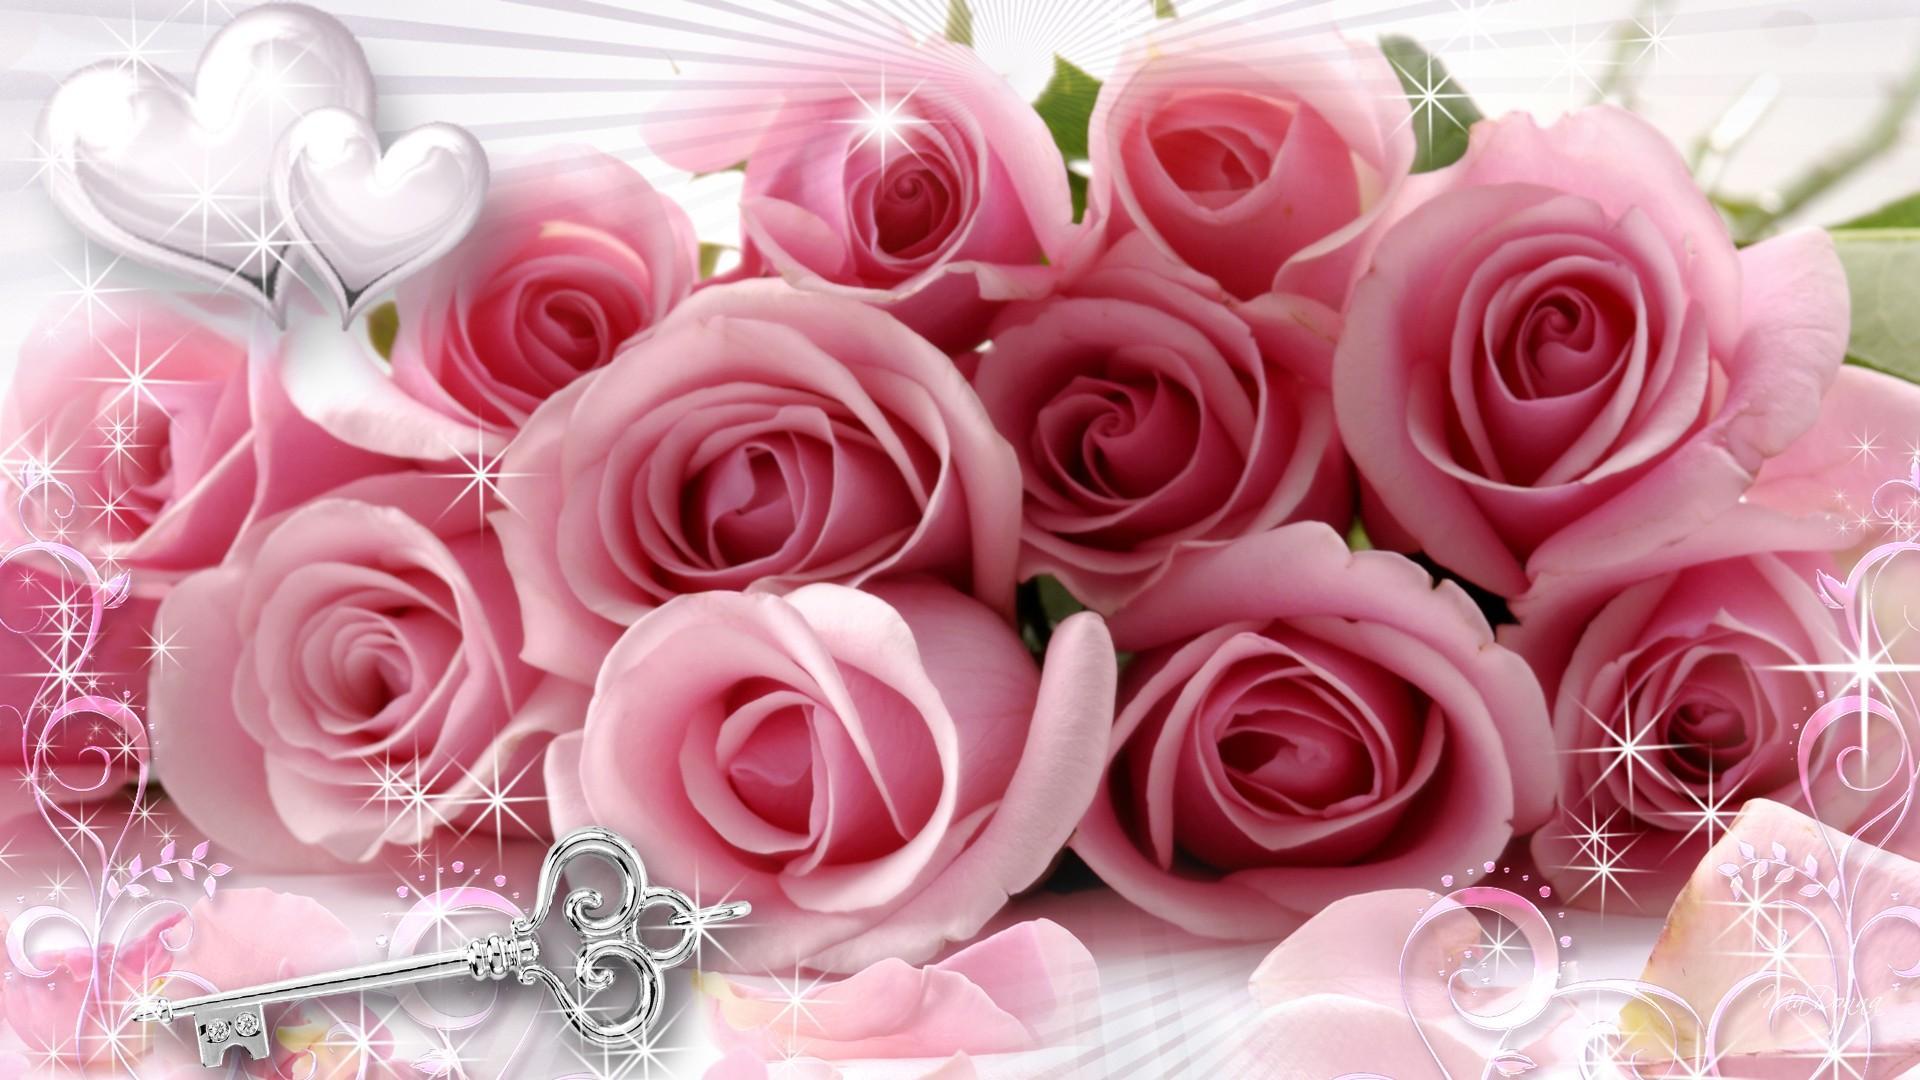 Pink Valentine Special wallpaper. nature and landscape